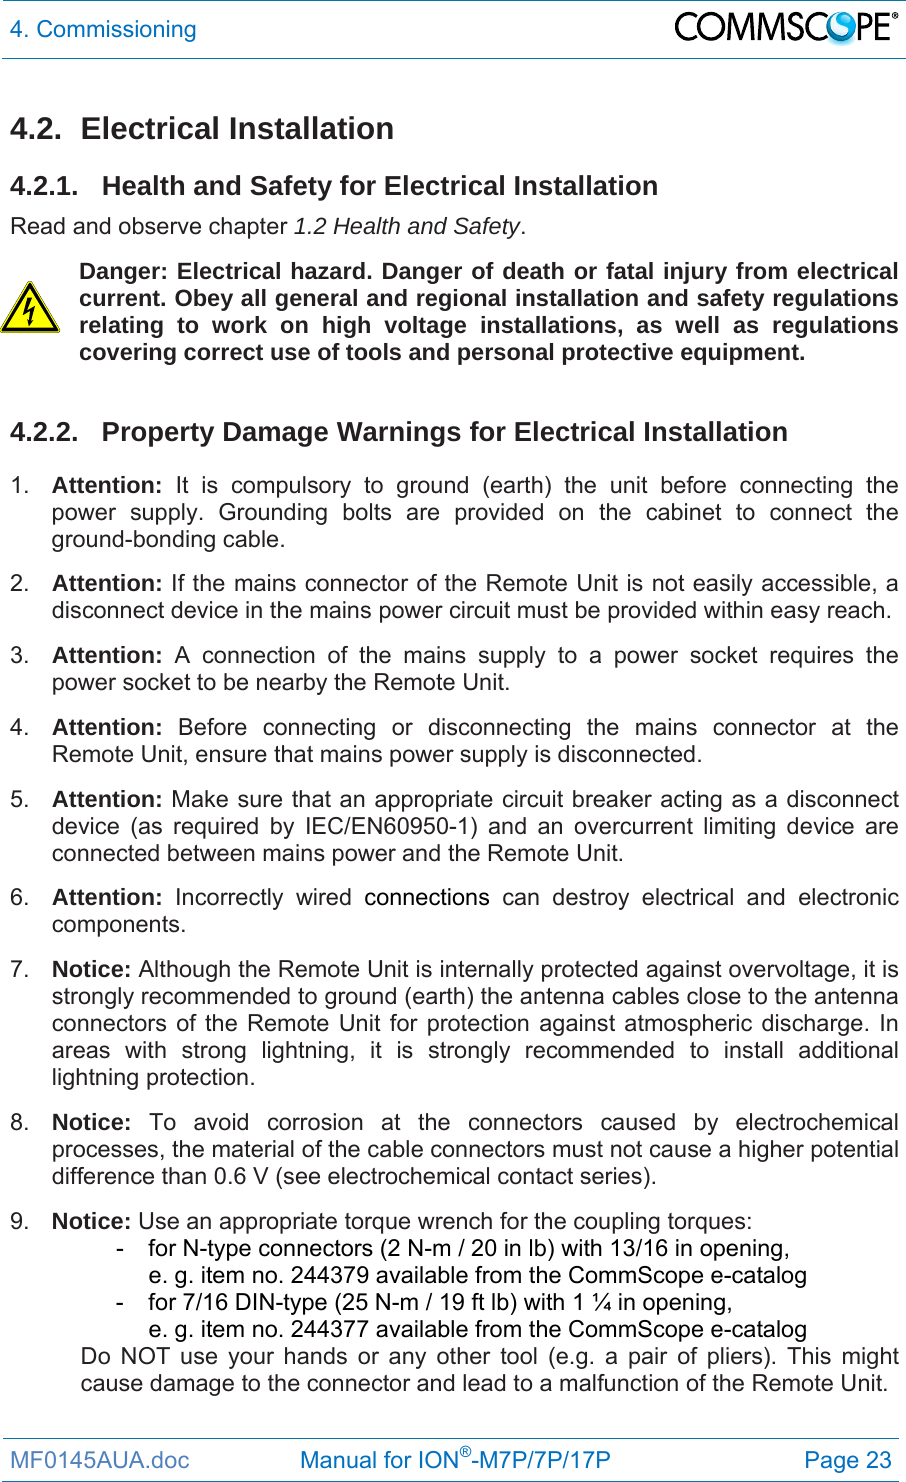 4. Commissioning  MF0145AUA.doc                 Manual for ION®-M7P/7P/17P Page 23 4.2. Electrical Installation 4.2.1.  Health and Safety for Electrical Installation Read and observe chapter 1.2 Health and Safety. Danger: Electrical hazard. Danger of death or fatal injury from electrical current. Obey all general and regional installation and safety regulations relating to work on high voltage installations, as well as regulations covering correct use of tools and personal protective equipment.  4.2.2.  Property Damage Warnings for Electrical Installation 1.  Attention: It is compulsory to ground (earth) the unit before connecting the power supply. Grounding bolts are provided on the cabinet to connect the ground-bonding cable.  2.  Attention: If the mains connector of the Remote Unit is not easily accessible, a disconnect device in the mains power circuit must be provided within easy reach. 3.  Attention: A connection of the mains supply to a power socket requires the power socket to be nearby the Remote Unit. 4.  Attention:  Before connecting or disconnecting the mains connector at the Remote Unit, ensure that mains power supply is disconnected. 5.  Attention: Make sure that an appropriate circuit breaker acting as a disconnect device (as required by IEC/EN60950-1) and an overcurrent limiting device are connected between mains power and the Remote Unit. 6.  Attention: Incorrectly wired connections can destroy electrical and electronic components.  7.  Notice: Although the Remote Unit is internally protected against overvoltage, it is strongly recommended to ground (earth) the antenna cables close to the antenna connectors of the Remote Unit for protection against atmospheric discharge. In areas with strong lightning, it is strongly recommended to install additional lightning protection. 8.  Notice: To avoid corrosion at the connectors caused by electrochemical processes, the material of the cable connectors must not cause a higher potential difference than 0.6 V (see electrochemical contact series). 9.  Notice: Use an appropriate torque wrench for the coupling torques:   -  for N-type connectors (2 N-m / 20 in lb) with 13/16 in opening,      e. g. item no. 244379 available from the CommScope e-catalog   -  for 7/16 DIN-type (25 N-m / 19 ft lb) with 1 ¼ in opening,      e. g. item no. 244377 available from the CommScope e-catalog Do NOT use your hands or any other tool (e.g. a pair of pliers). This might cause damage to the connector and lead to a malfunction of the Remote Unit. 